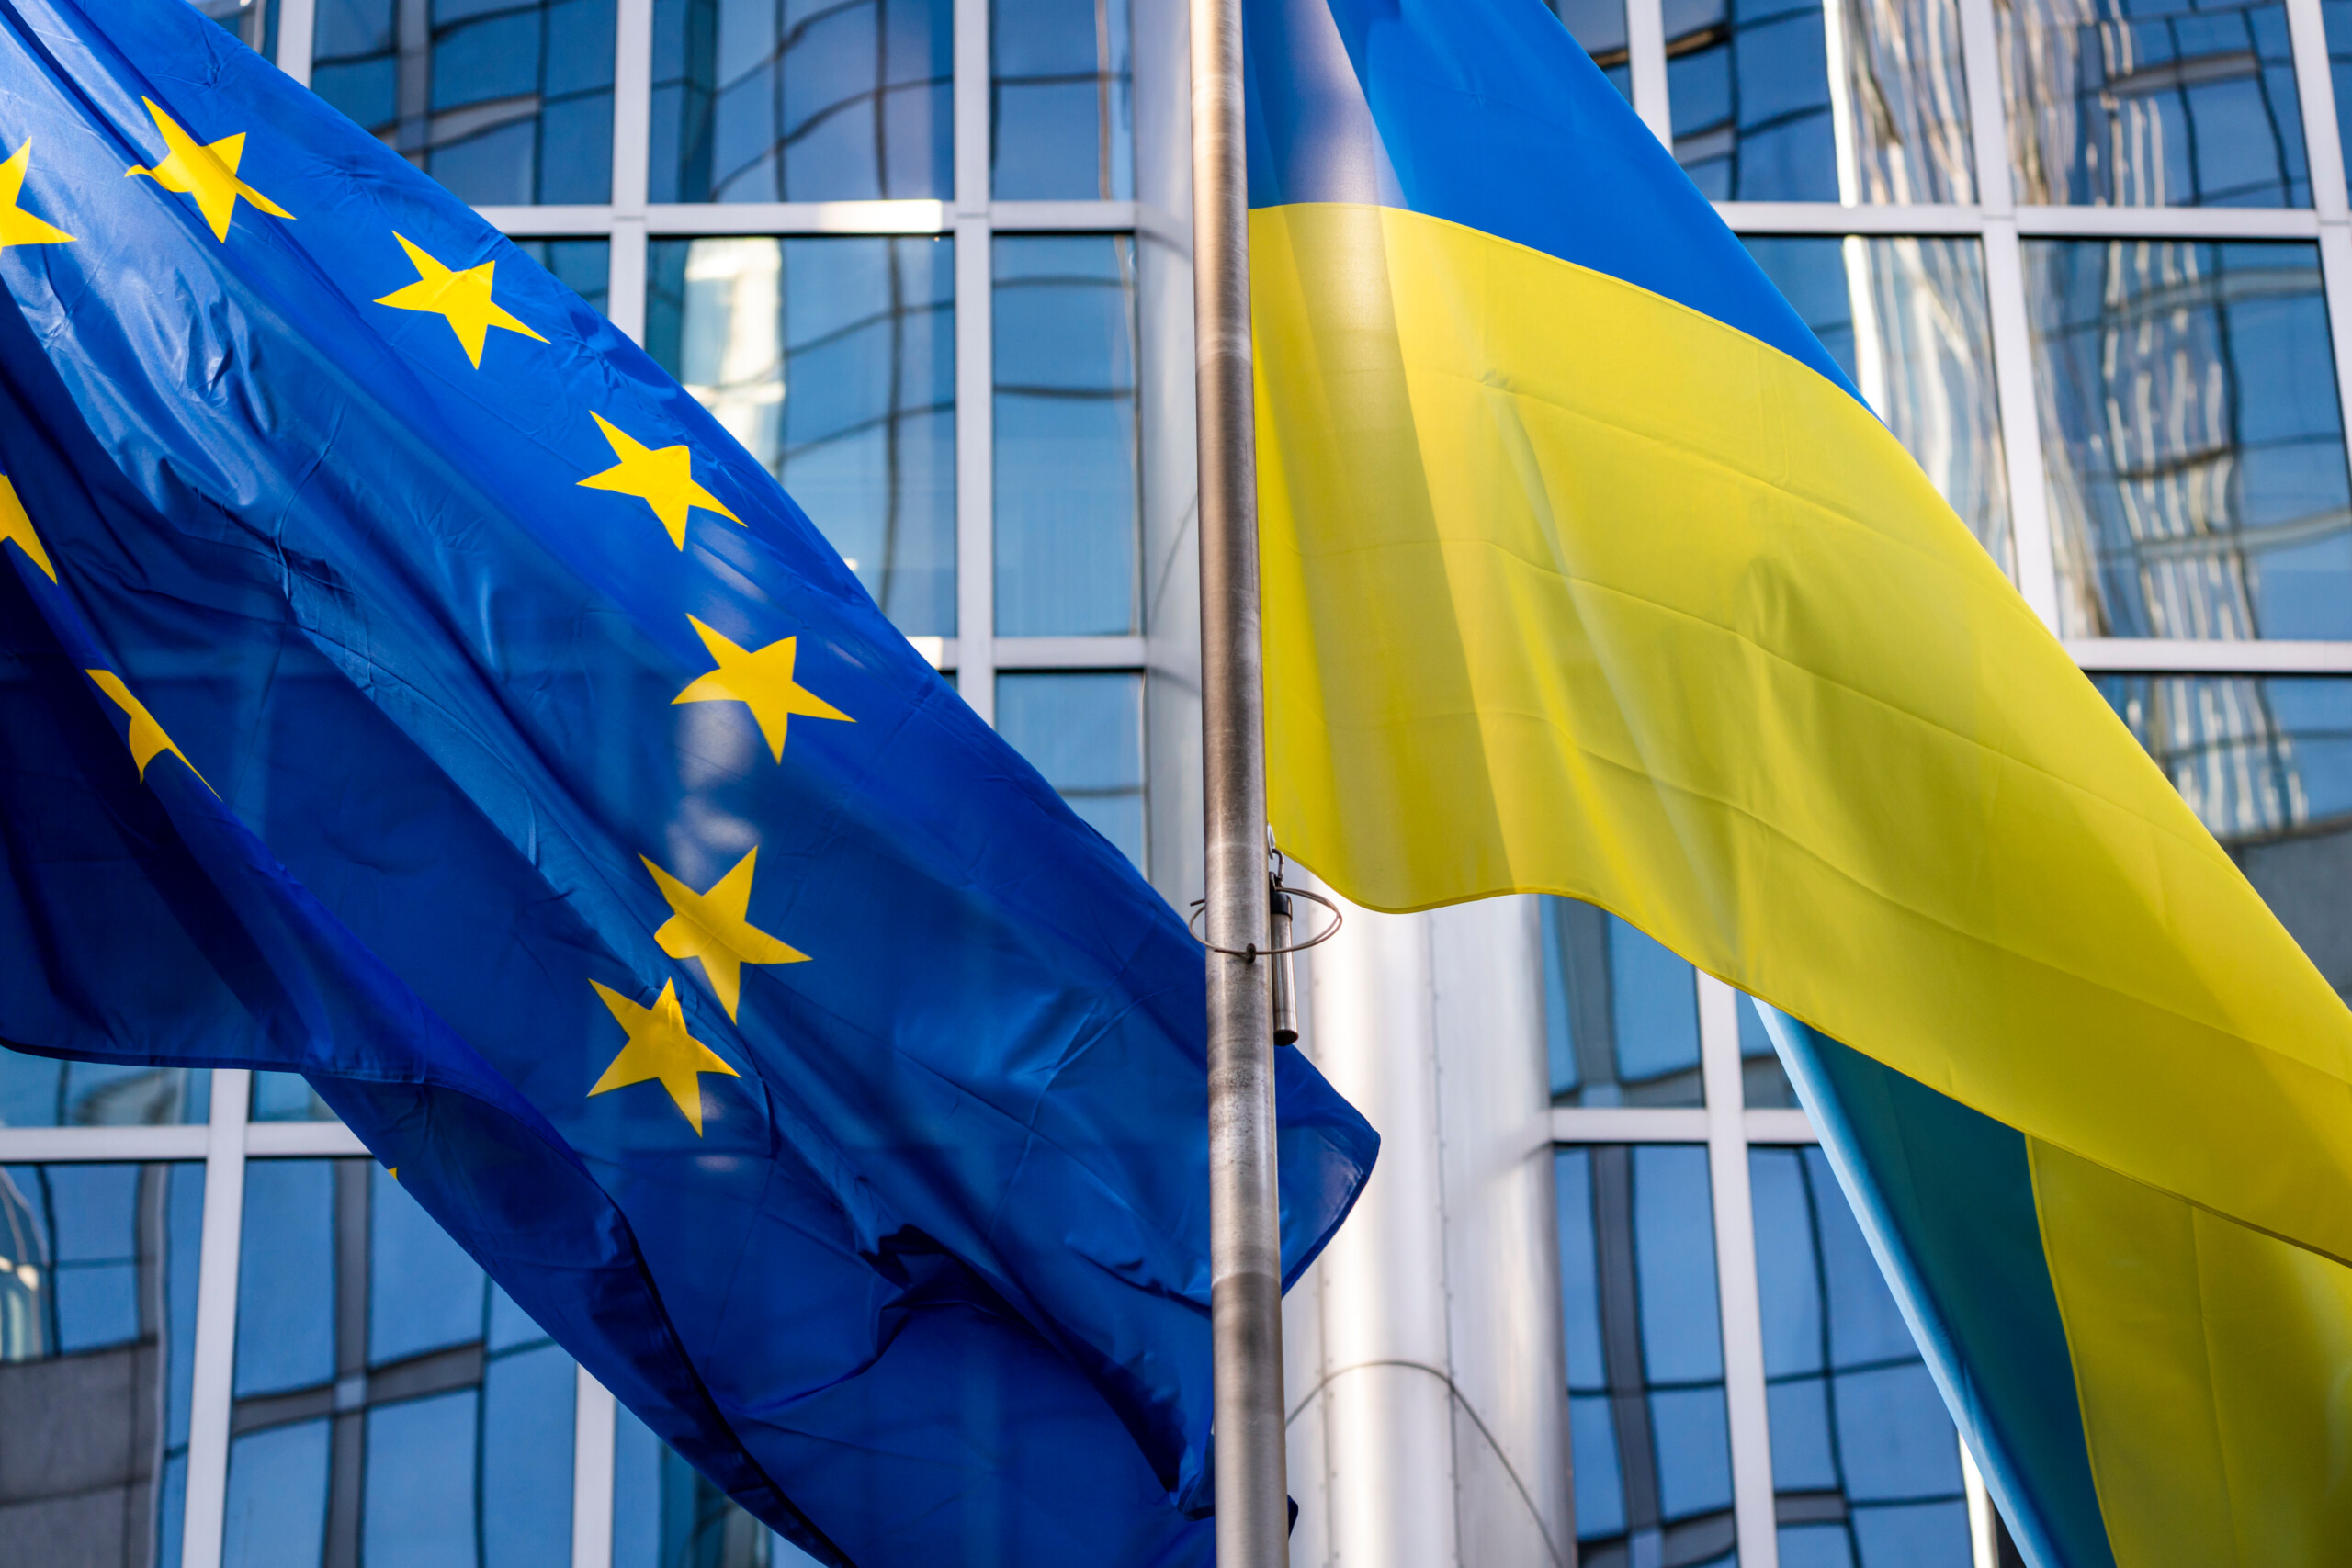 Ukrainian Flag is raised at the EP building in Brussels.